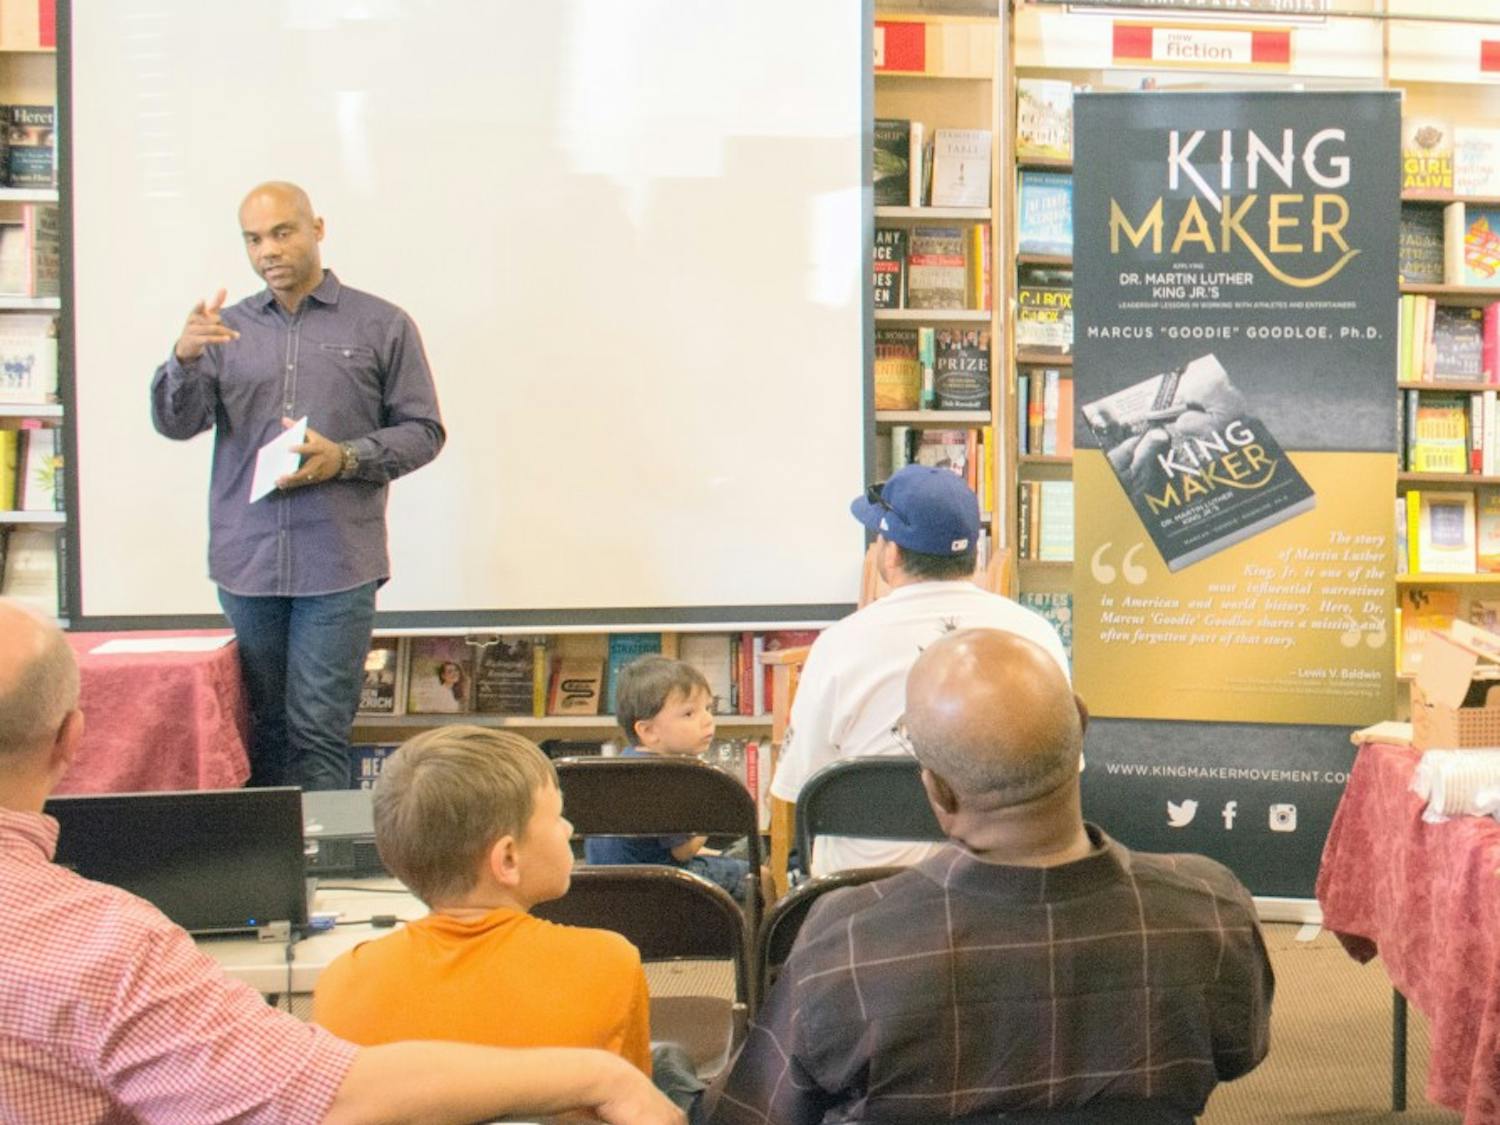 Author Marcus “Goodie” Goodloe, a UNM alumnus, discusses his book “King Maker” at Bookworks on Saturday, Sept. 26. Goodloe’s book offers a look into Dr. Martin Luther King Jr.’s partnership with athletes and entertainers.